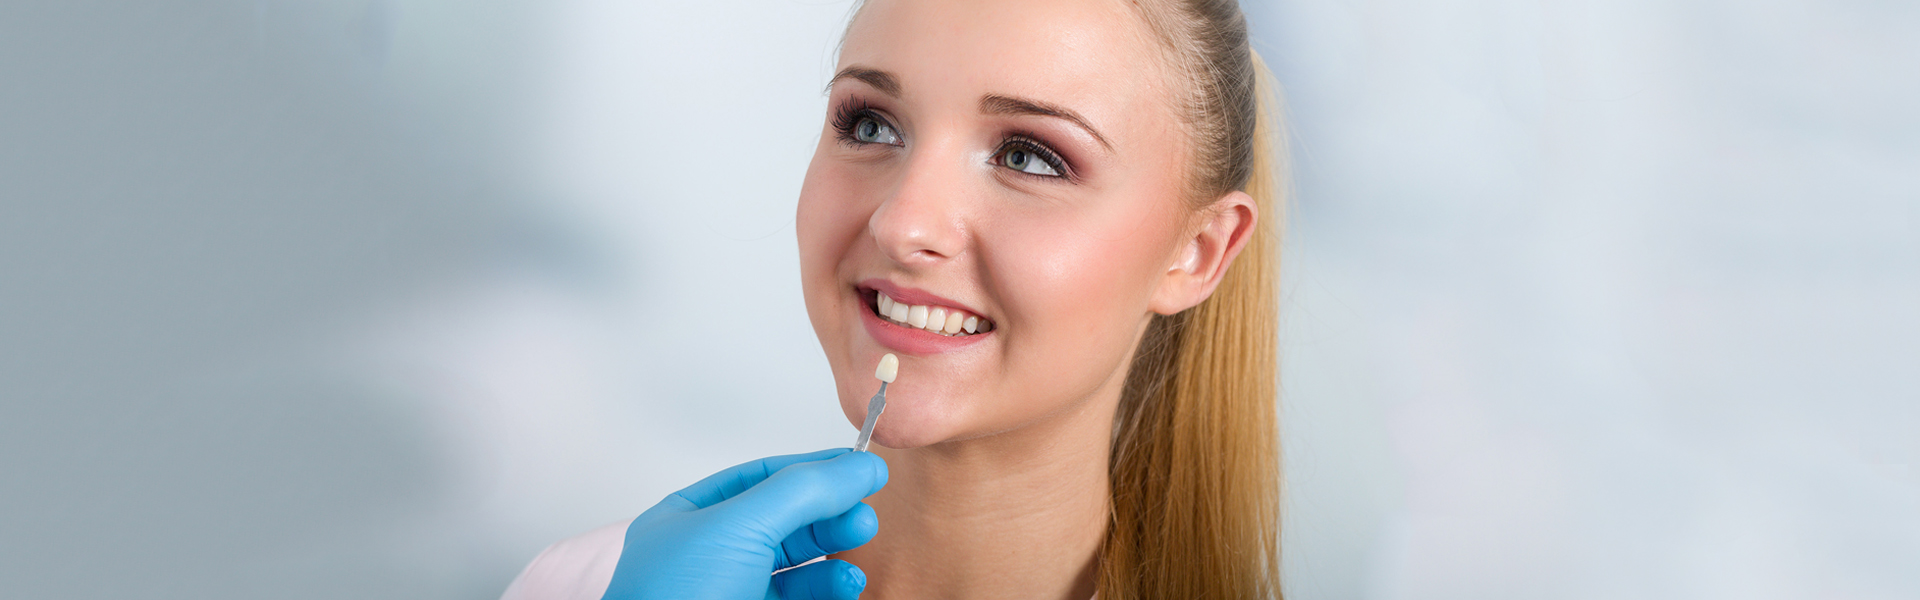 Dental Veneers Can Help You Get the Perfect Smile